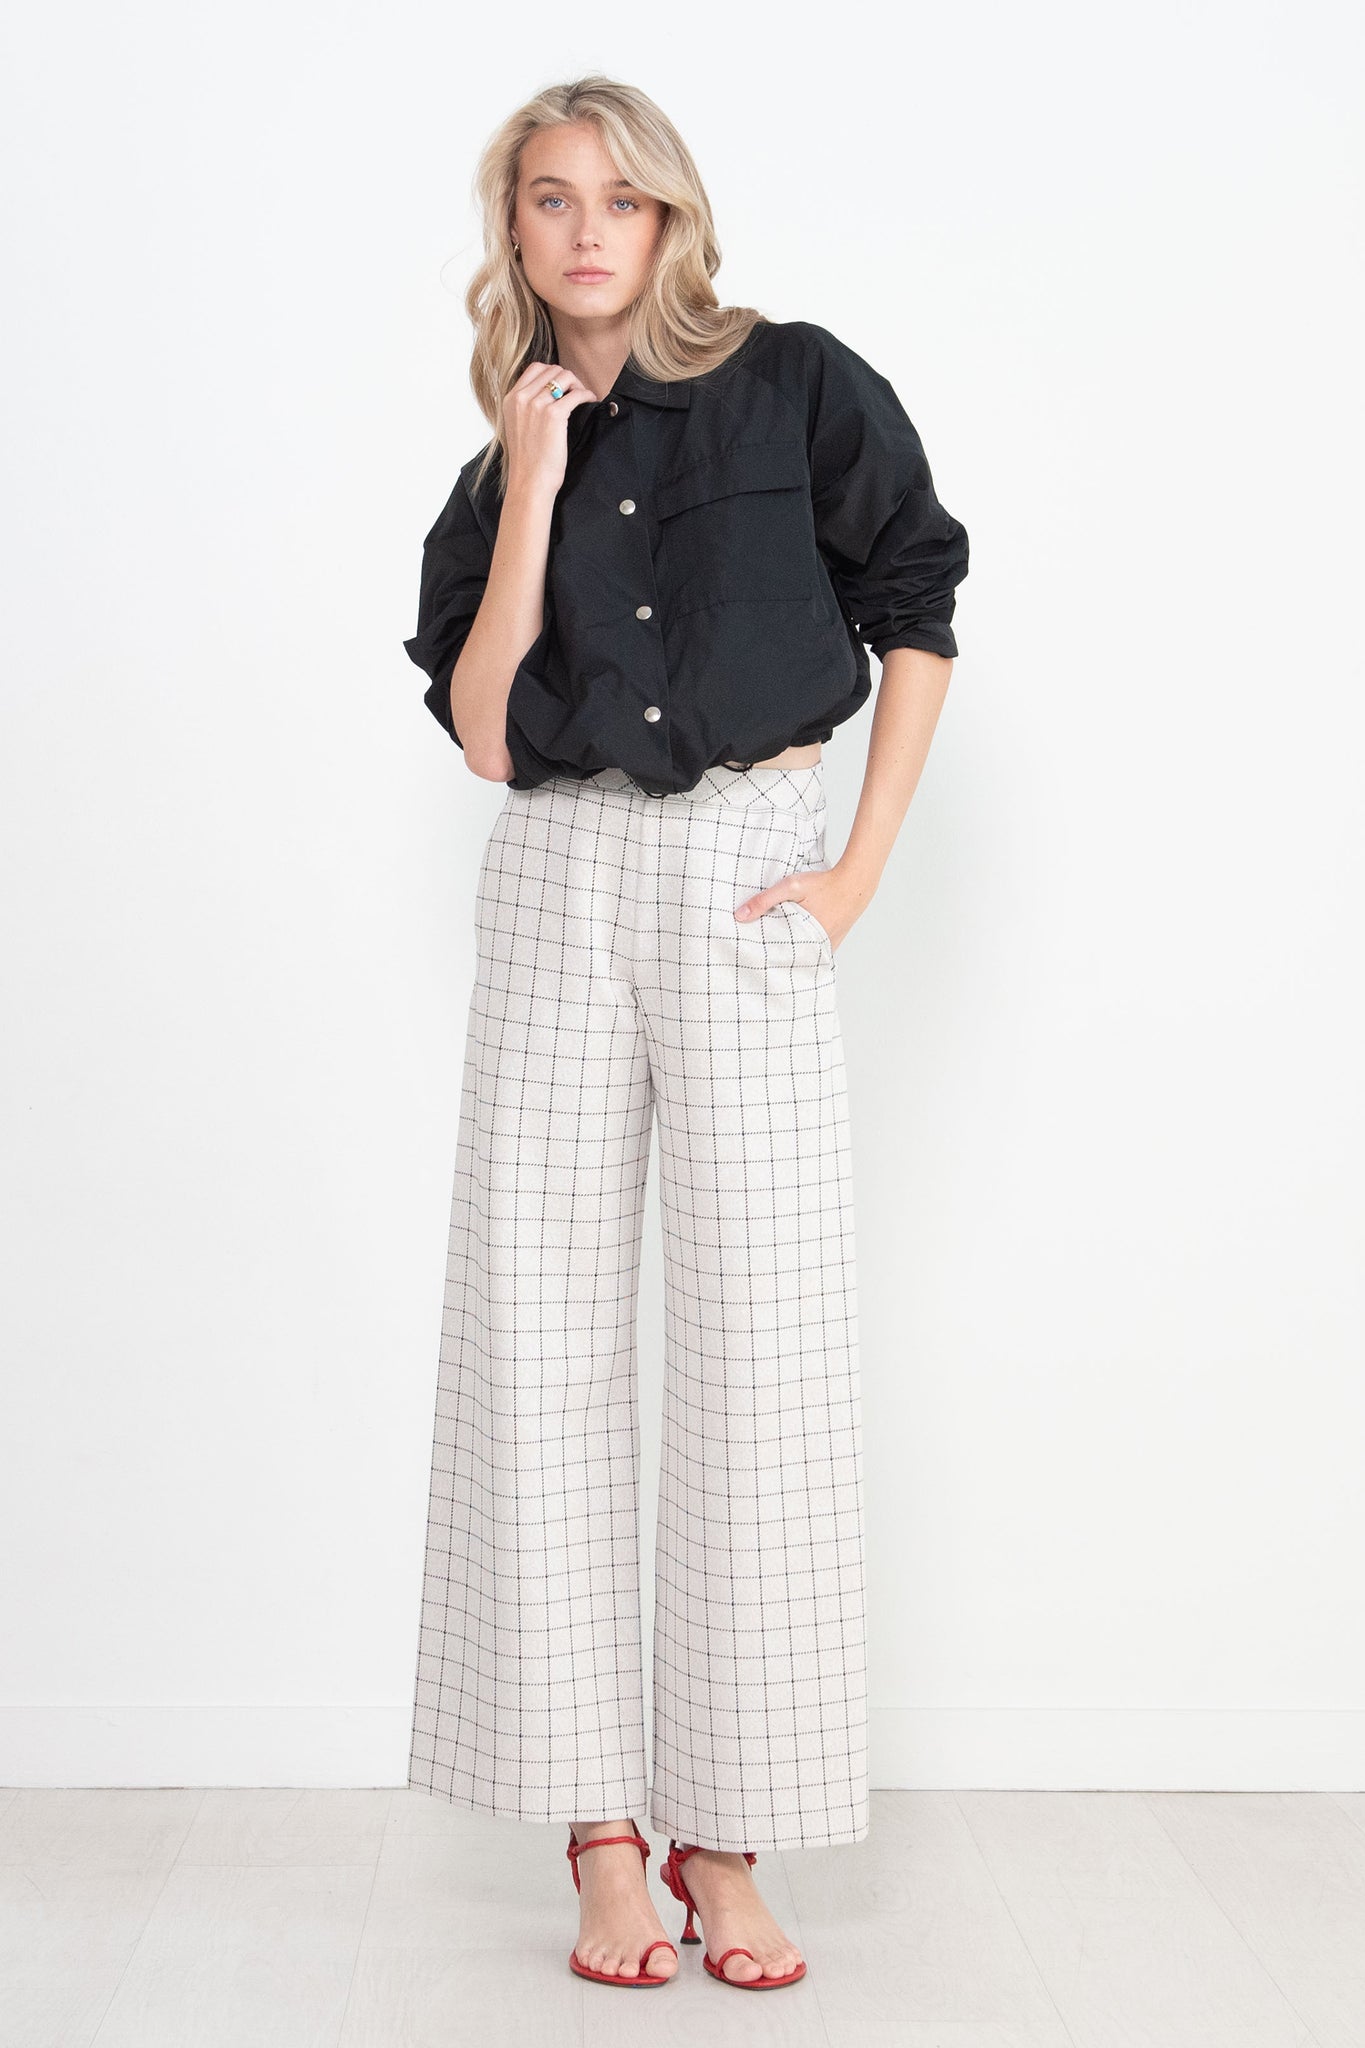 ROSETTA GETTY - Straight Leg Pull On Pant, Fawn and Black